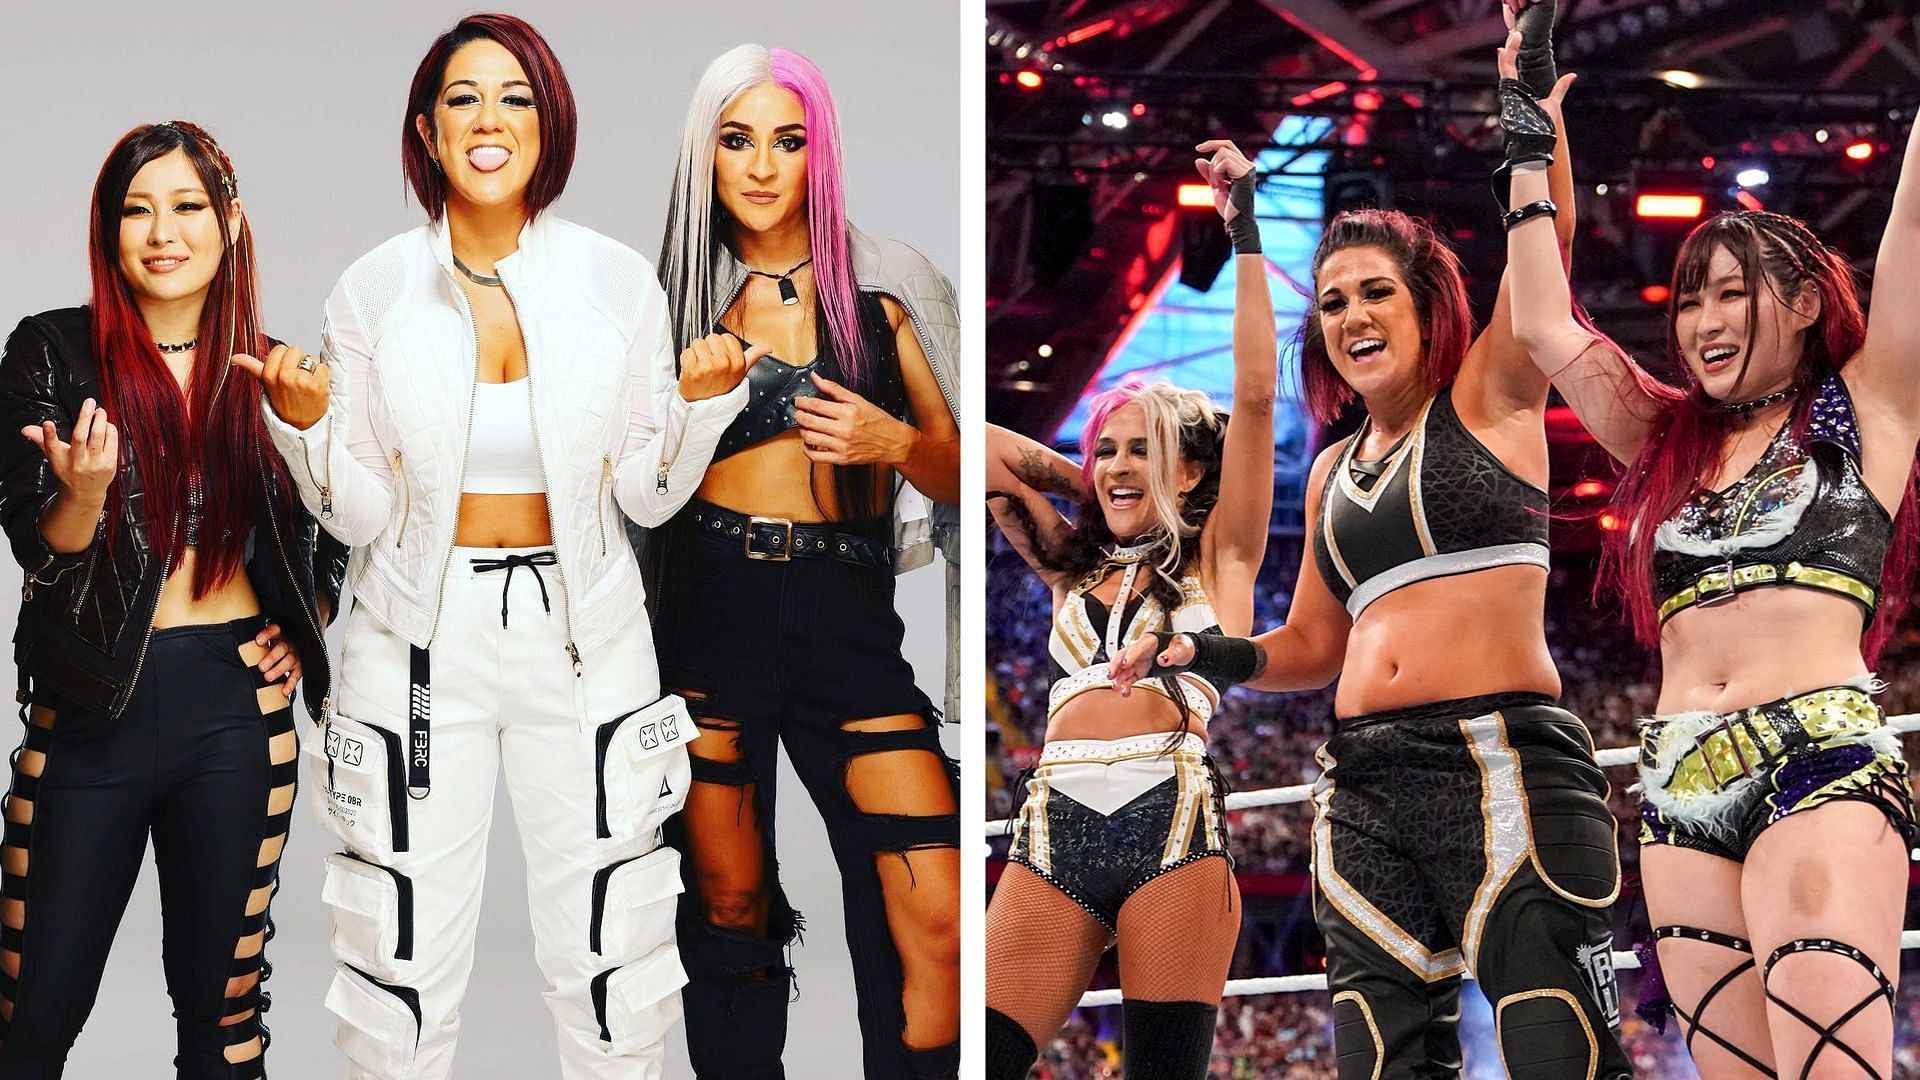 directions for Bayley's Damage Control following WWE Clash at the Castle